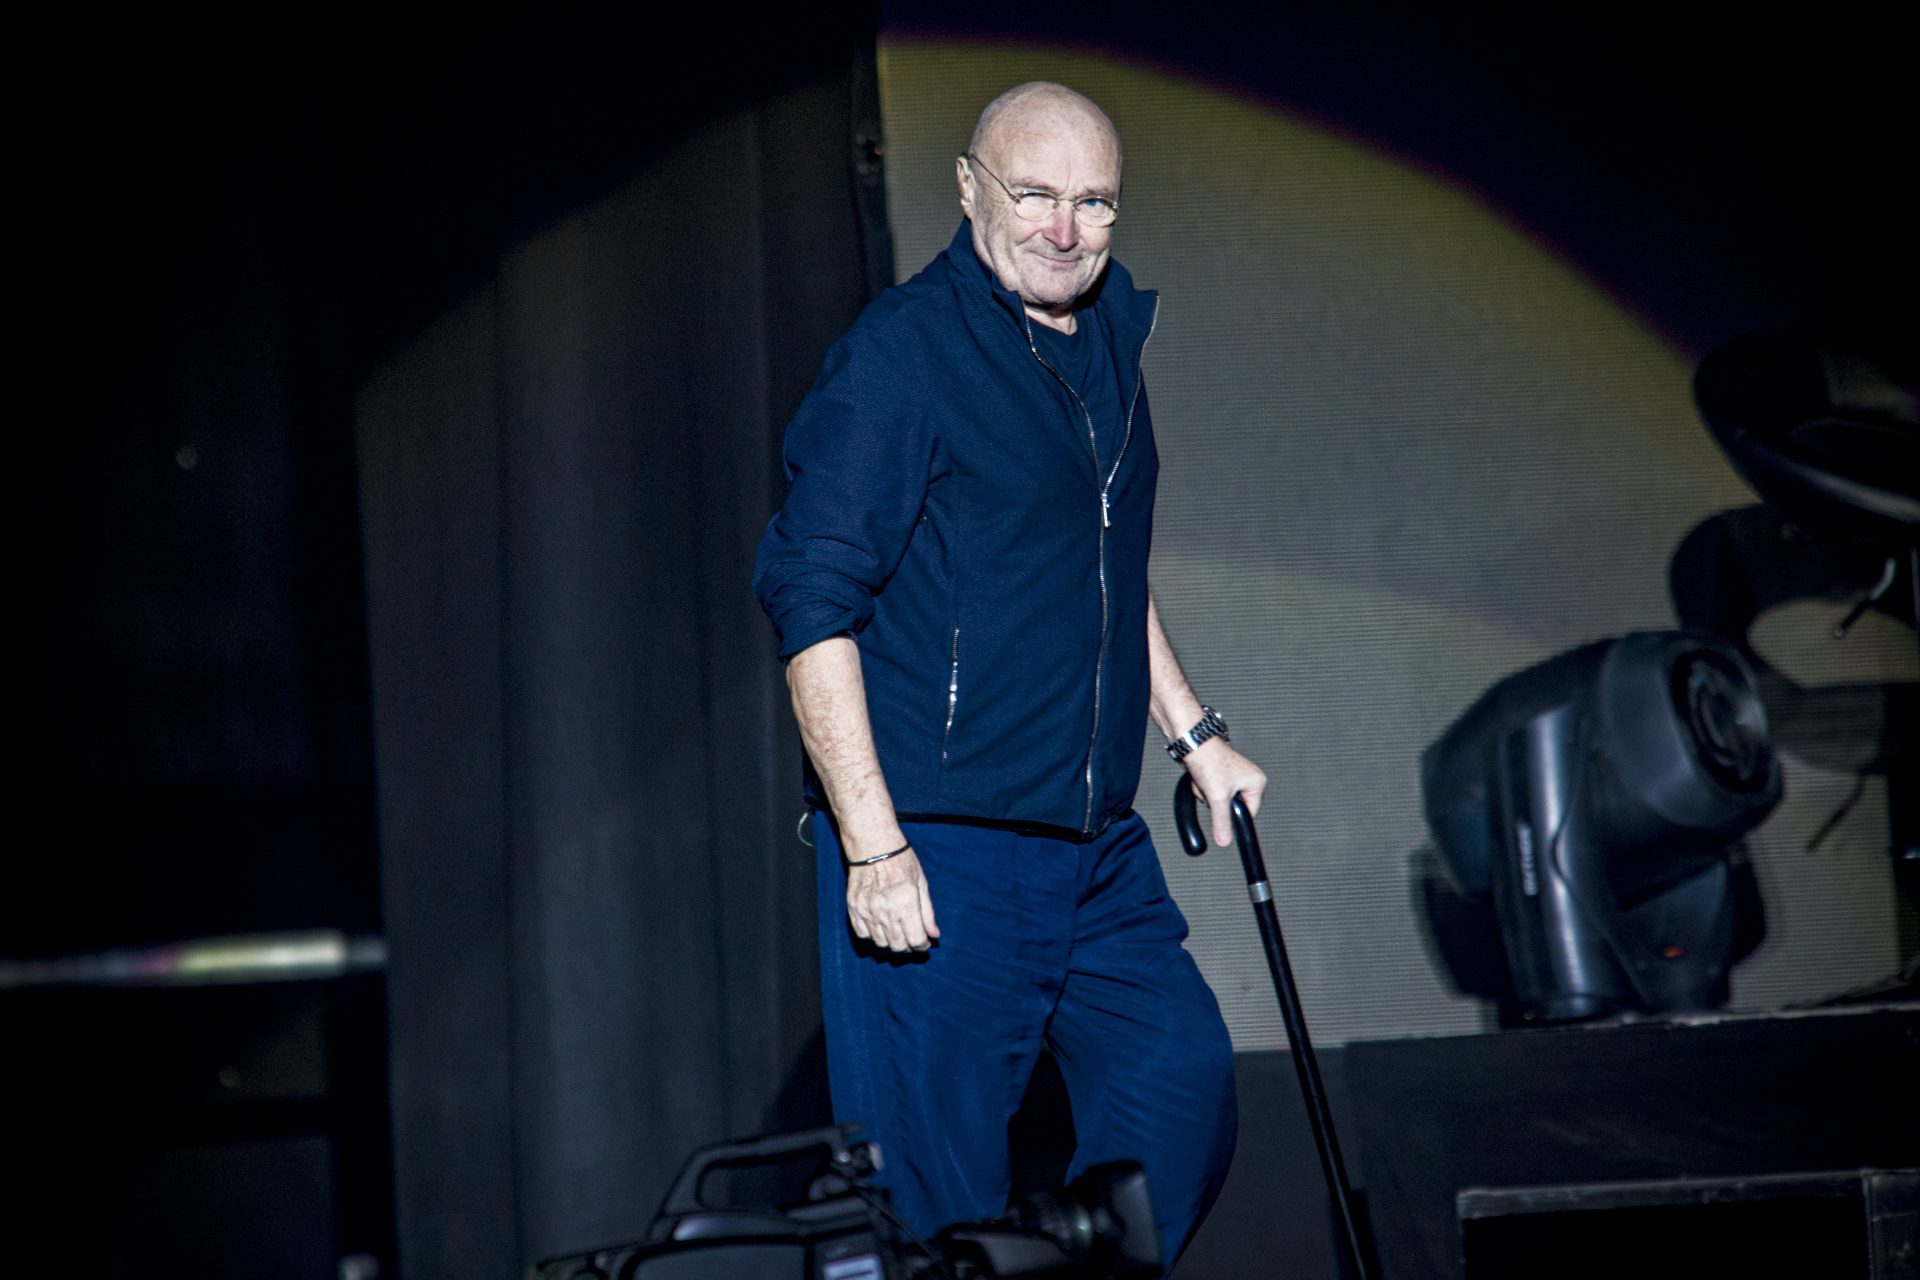 <p>Phil Collins has not had much luck with his health in recent years. In 2009, he injured a vertebrate in his neck, and the resulting surgery damaged his hands and tragically limited his ability to play the drums. More recently, he has battled diabetes, divorce, and aIc0holism. In 2017, he required stitches in his eye after a freak accident.</p>